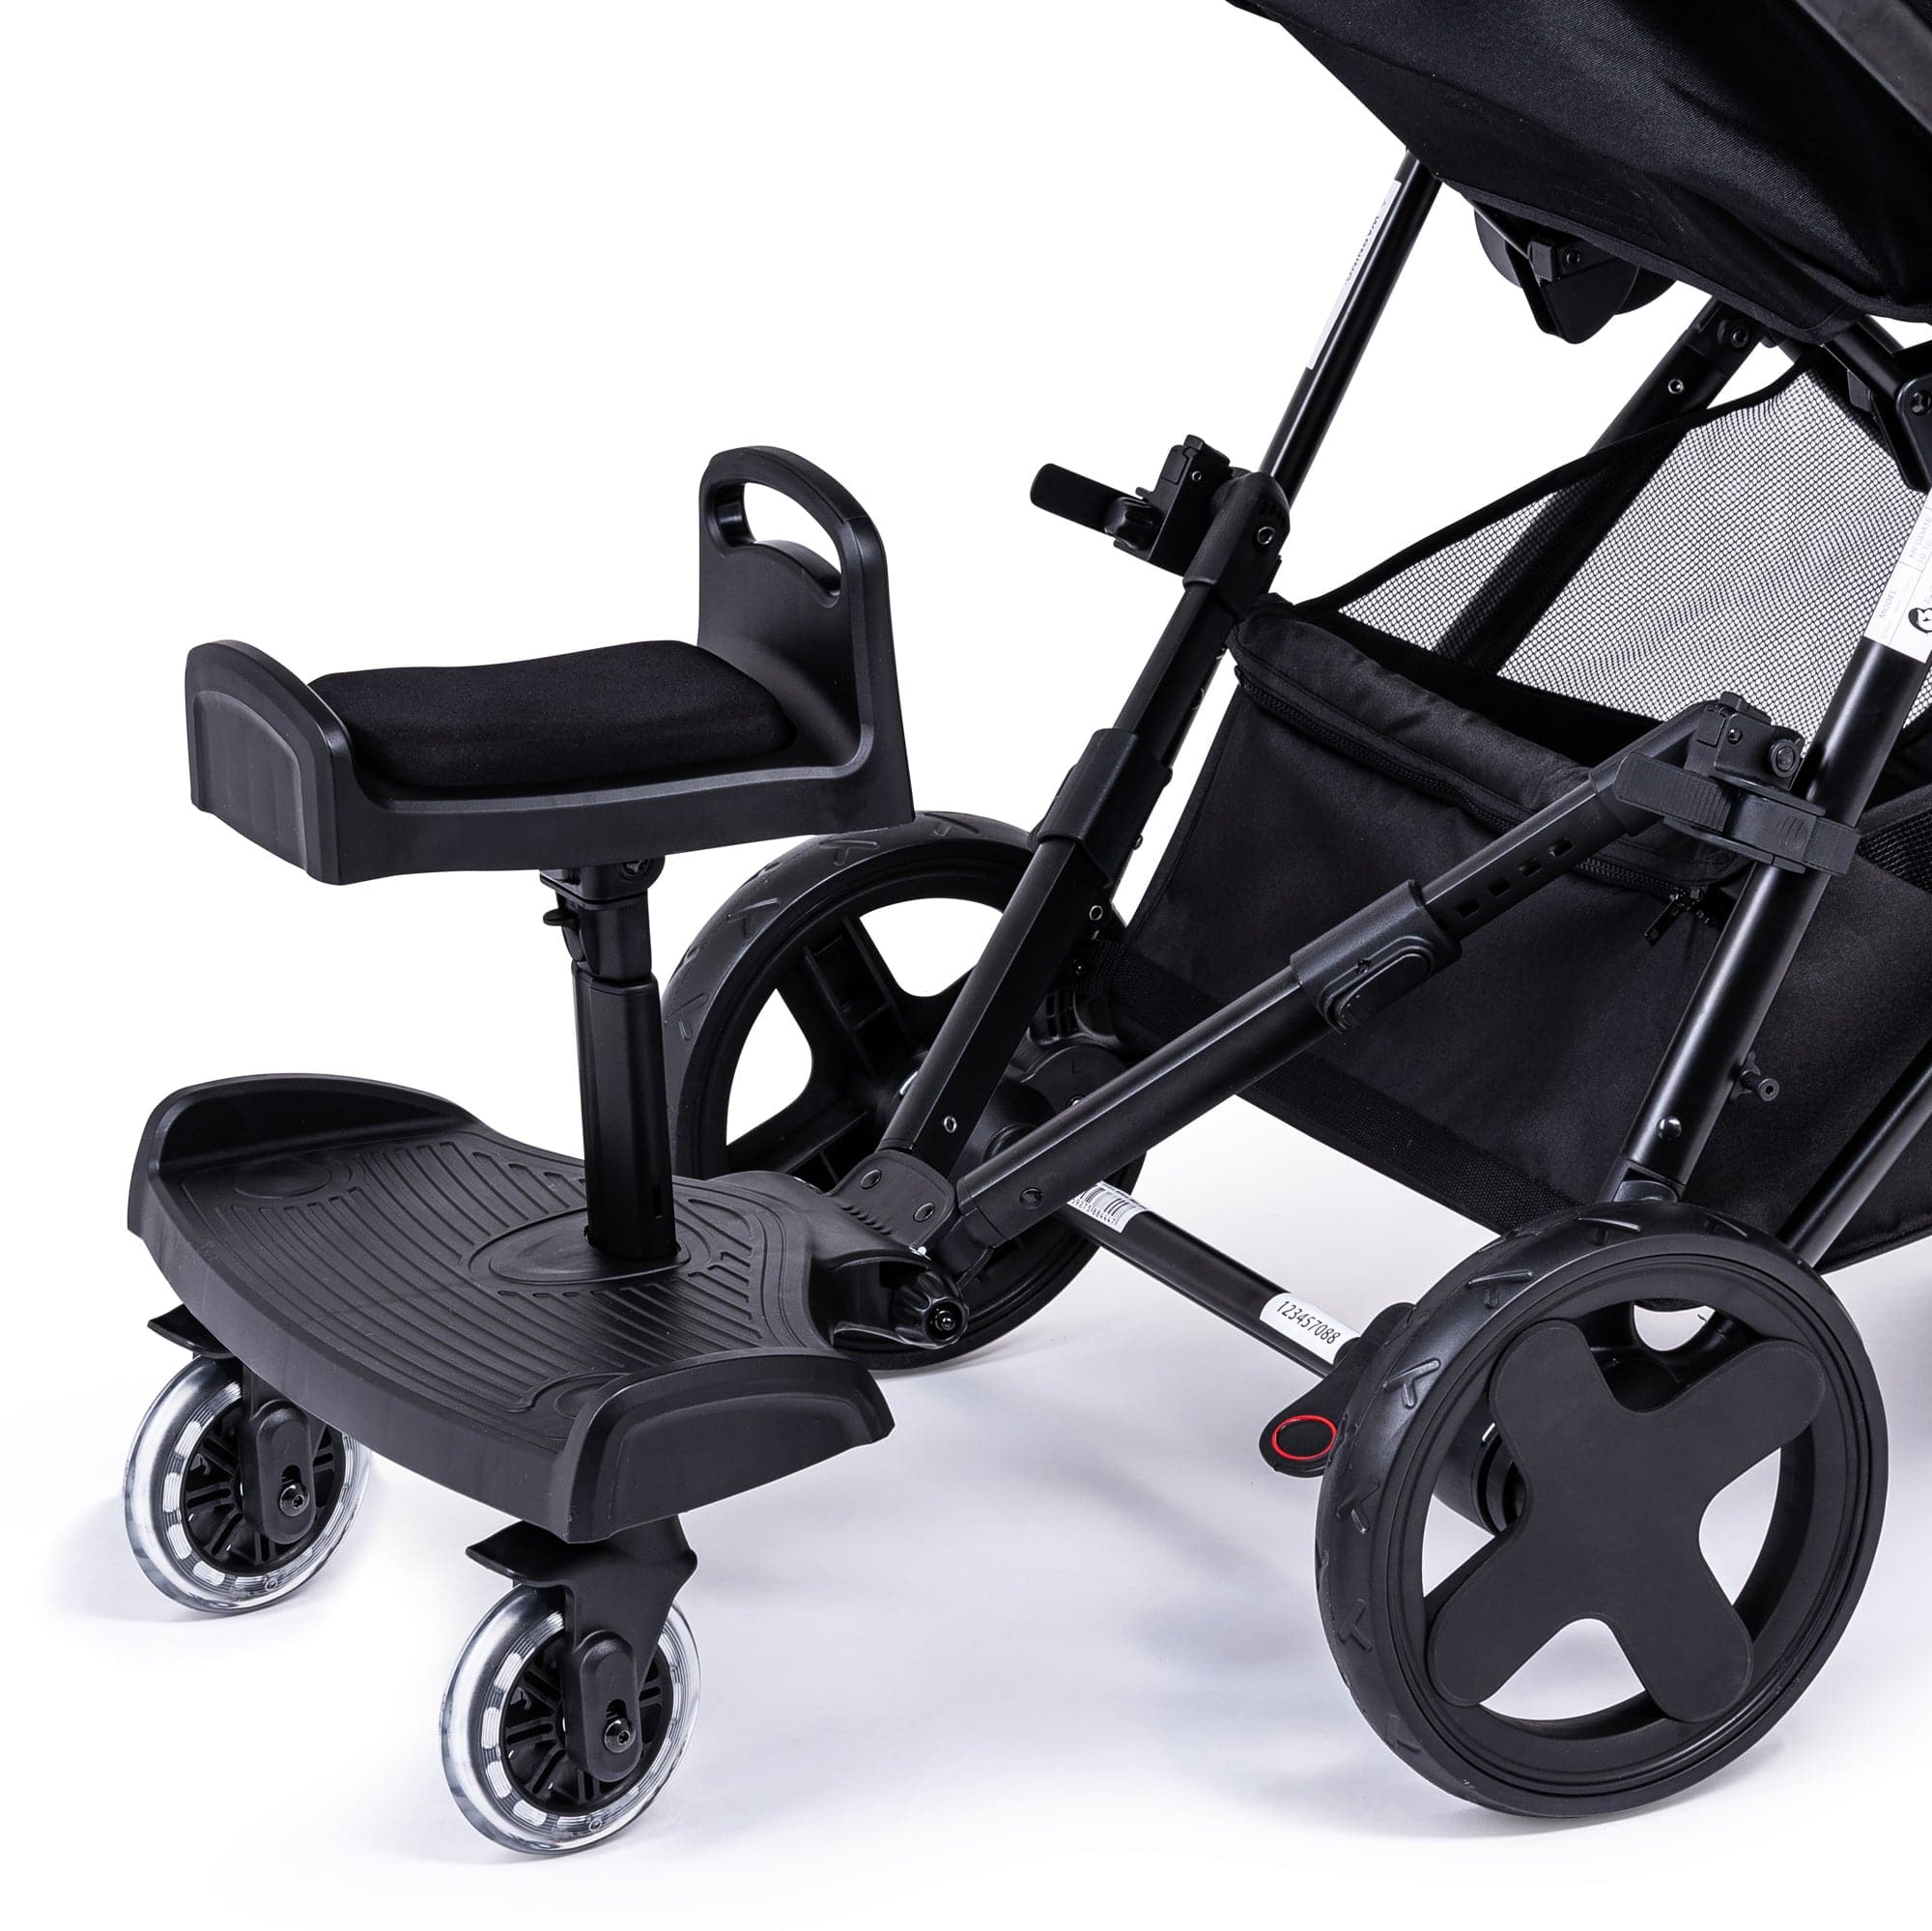 Ride On Board with Seat Compatible with Inglesina - For Your Little One